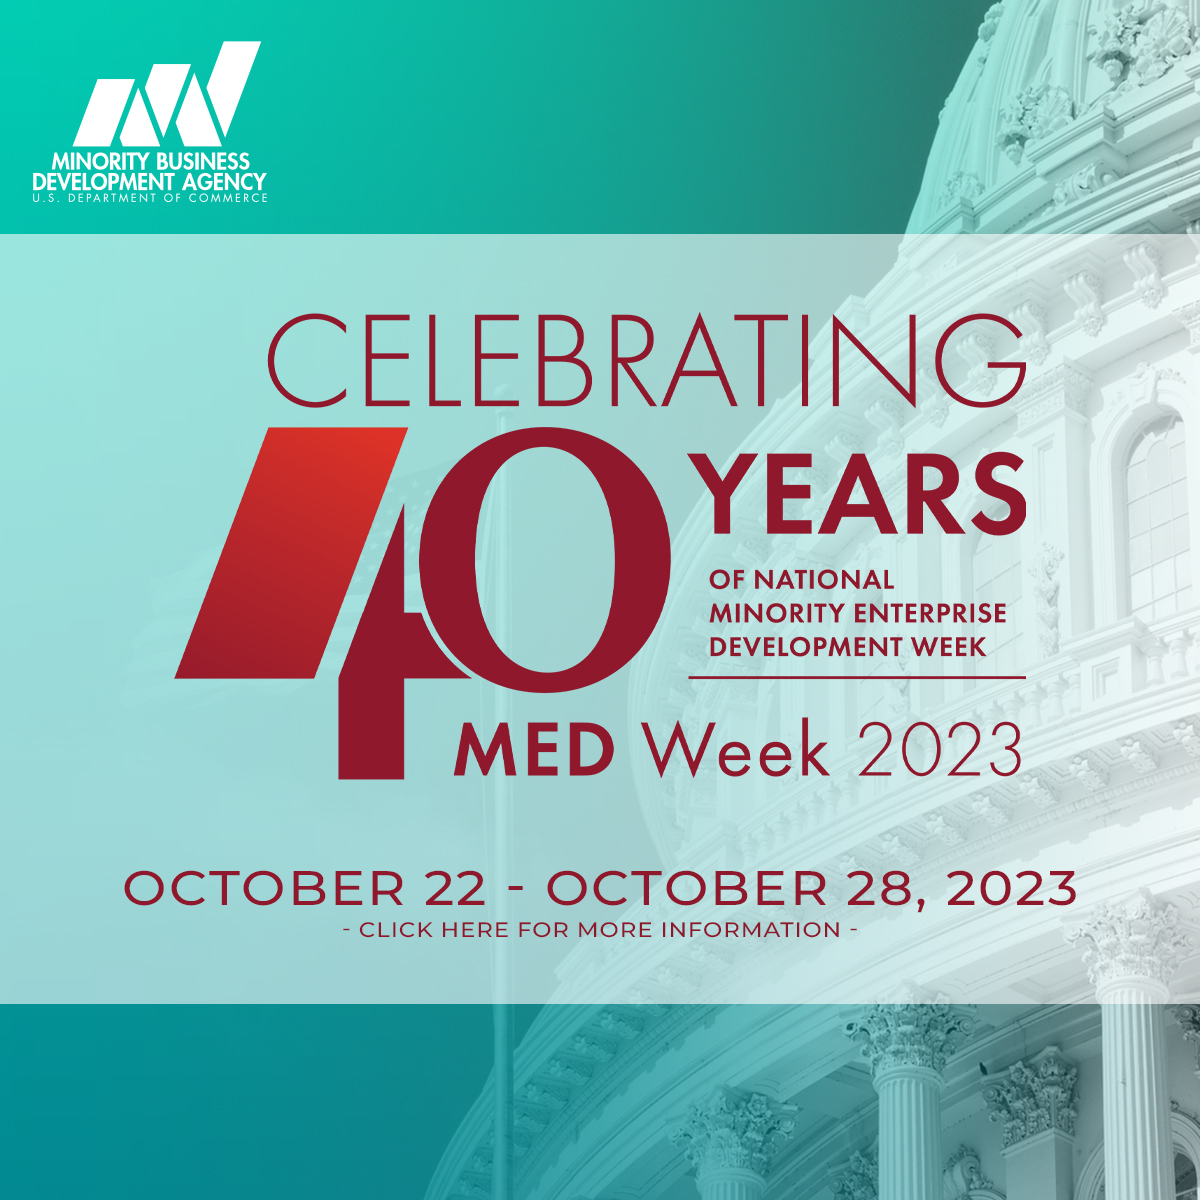 Celebrate 40 Years of National Minority Enterprise Development Week! The Minority Business Development Agency (MBDA) and the National Minority Supplier Development Council (NMSDCHQ) are collaborating...